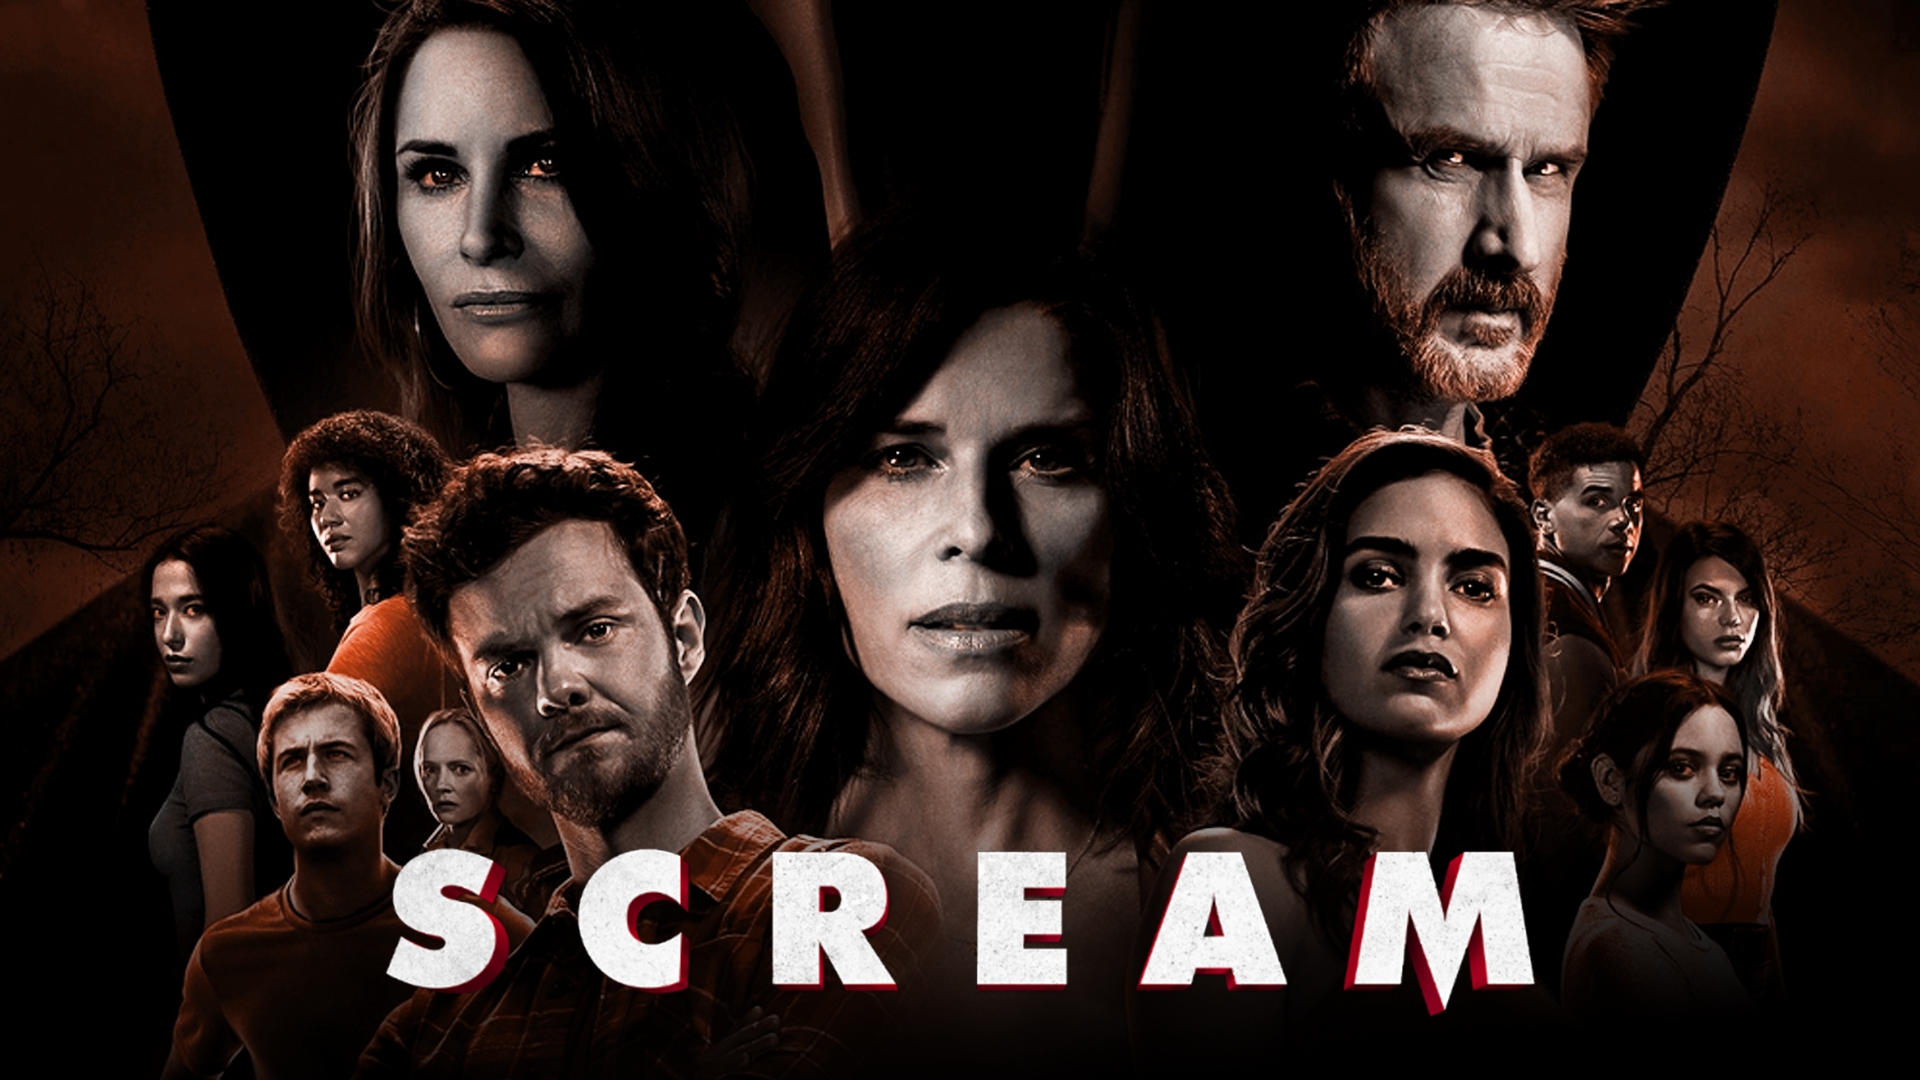 Scream takes a stab at satirizing itself and fandom